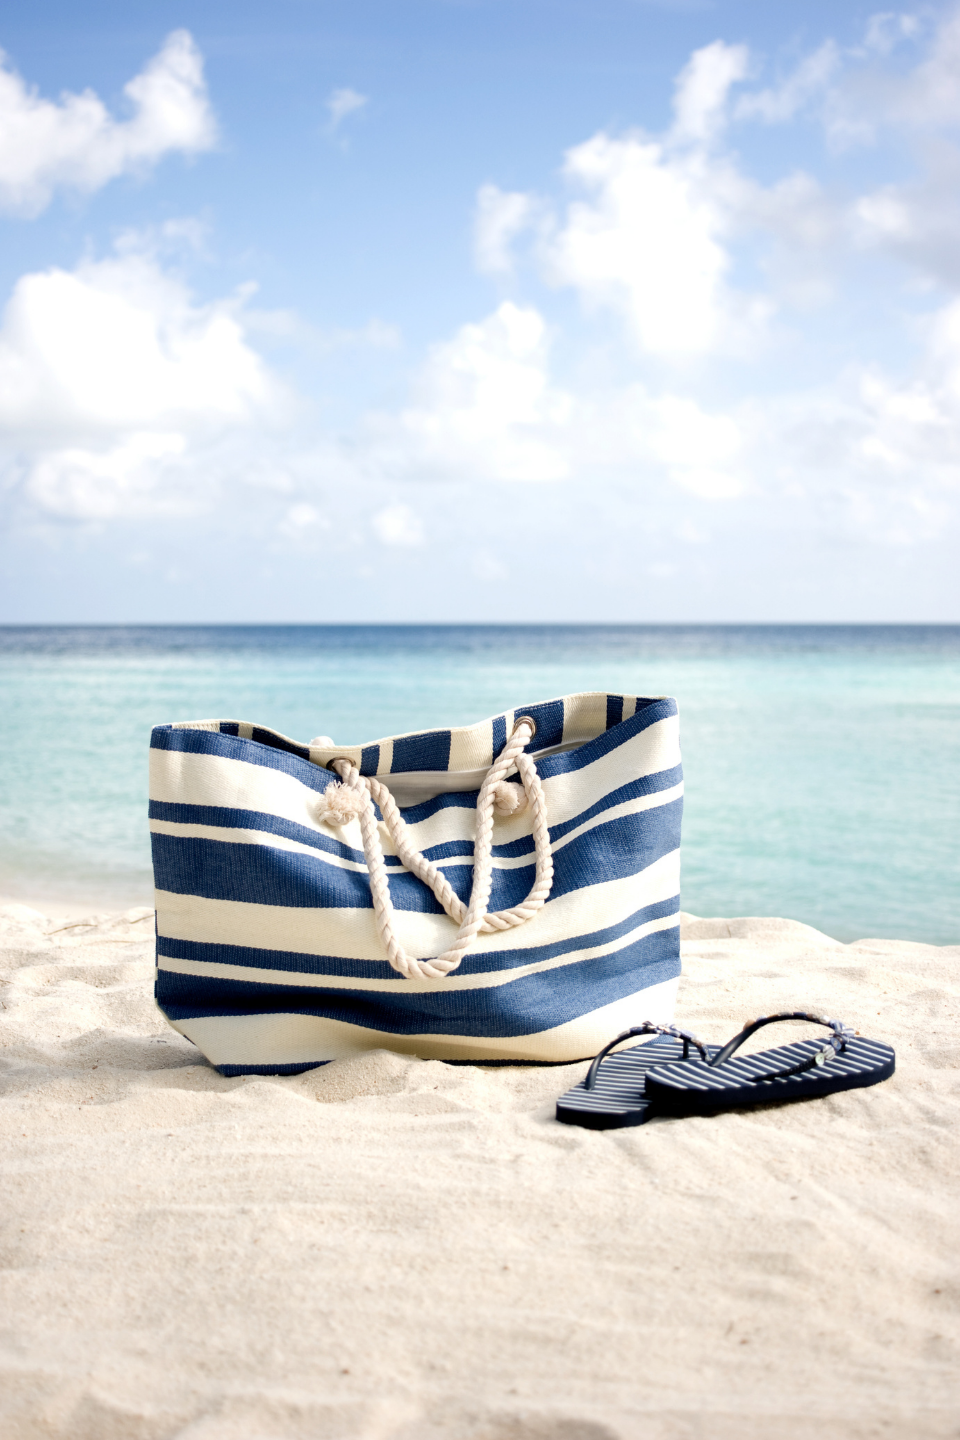 Beach Beauty Bag: 11 Essentials to Pack so You Always Look Amazing Outdoors